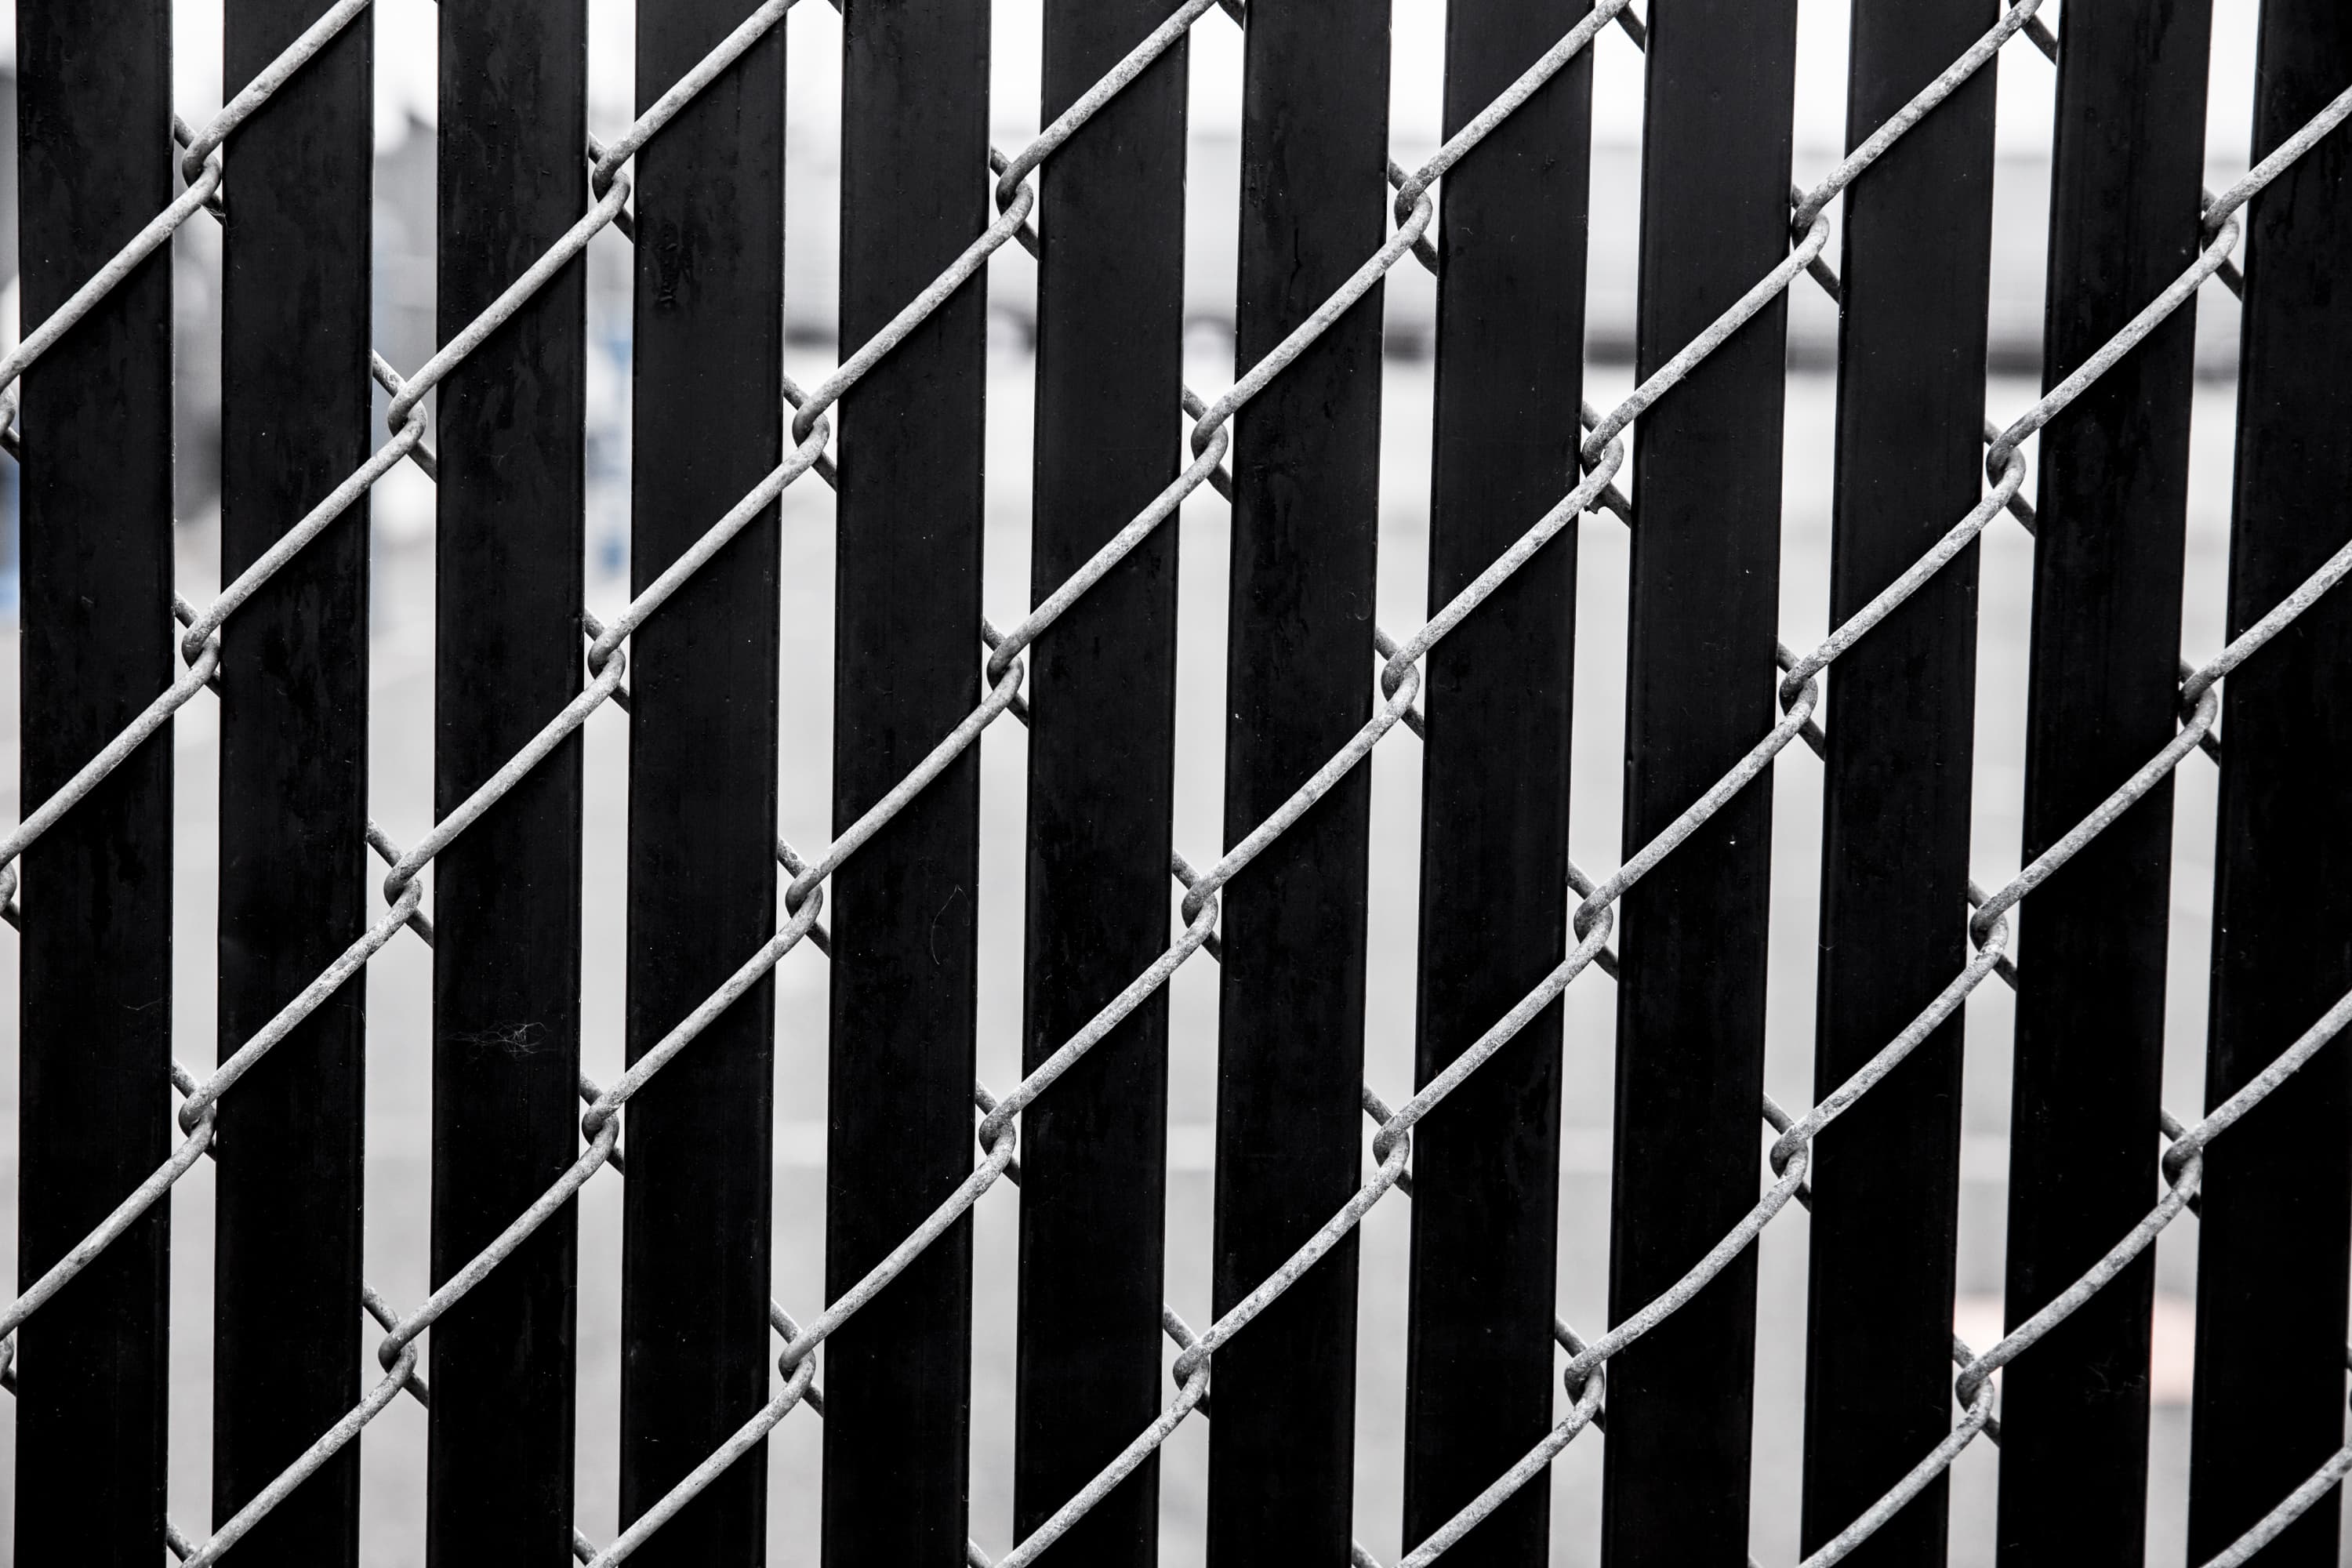 A chain link fence with black slats, close up